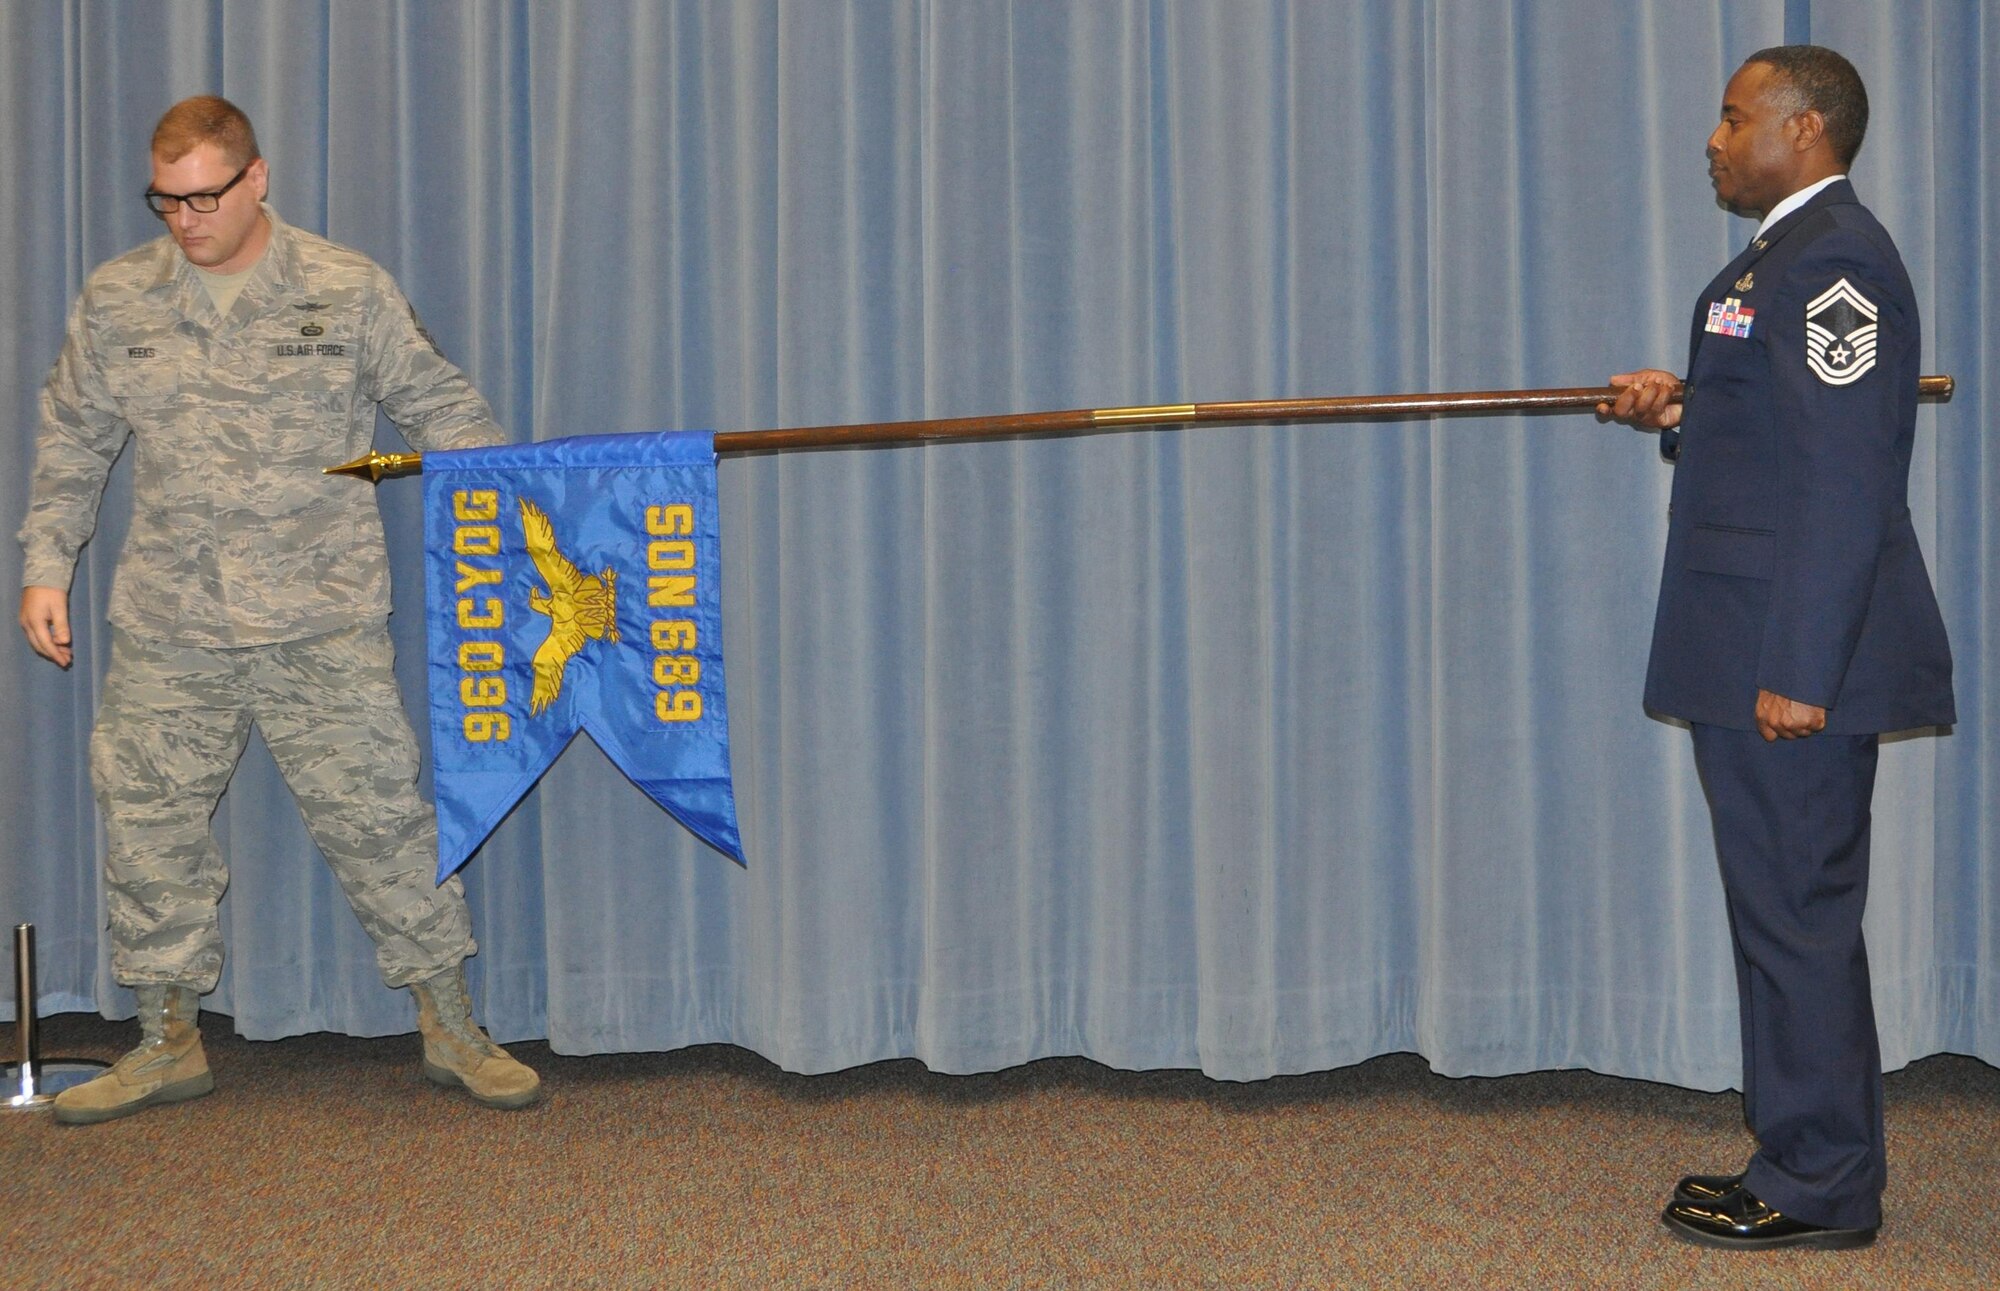 The 689th Network Operations Squadron’s guidon is unfurled during an activation and Assumption of Command ceremony Feb. 12, at Gunter Annex. The 689th is now commanded by Maj. Kevin Deibler and is the Air Force’s newest unit in the Cyber Fight. (U.S. Air Force photo by Bradley J. Clark)